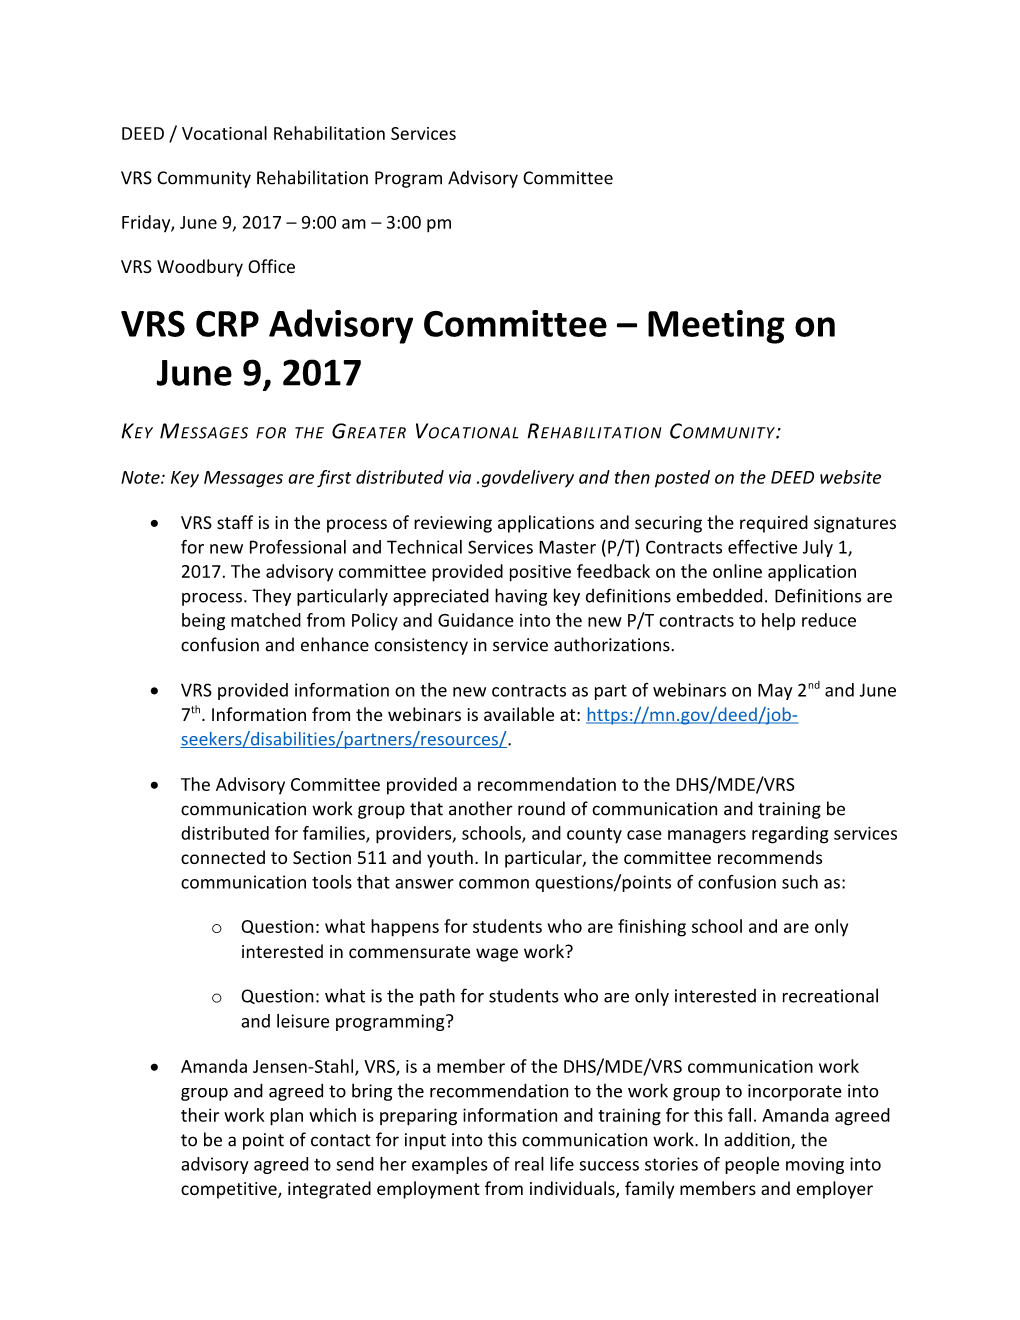 CRP Advisory Committee Key Messages for June 9, 2017 Meeting